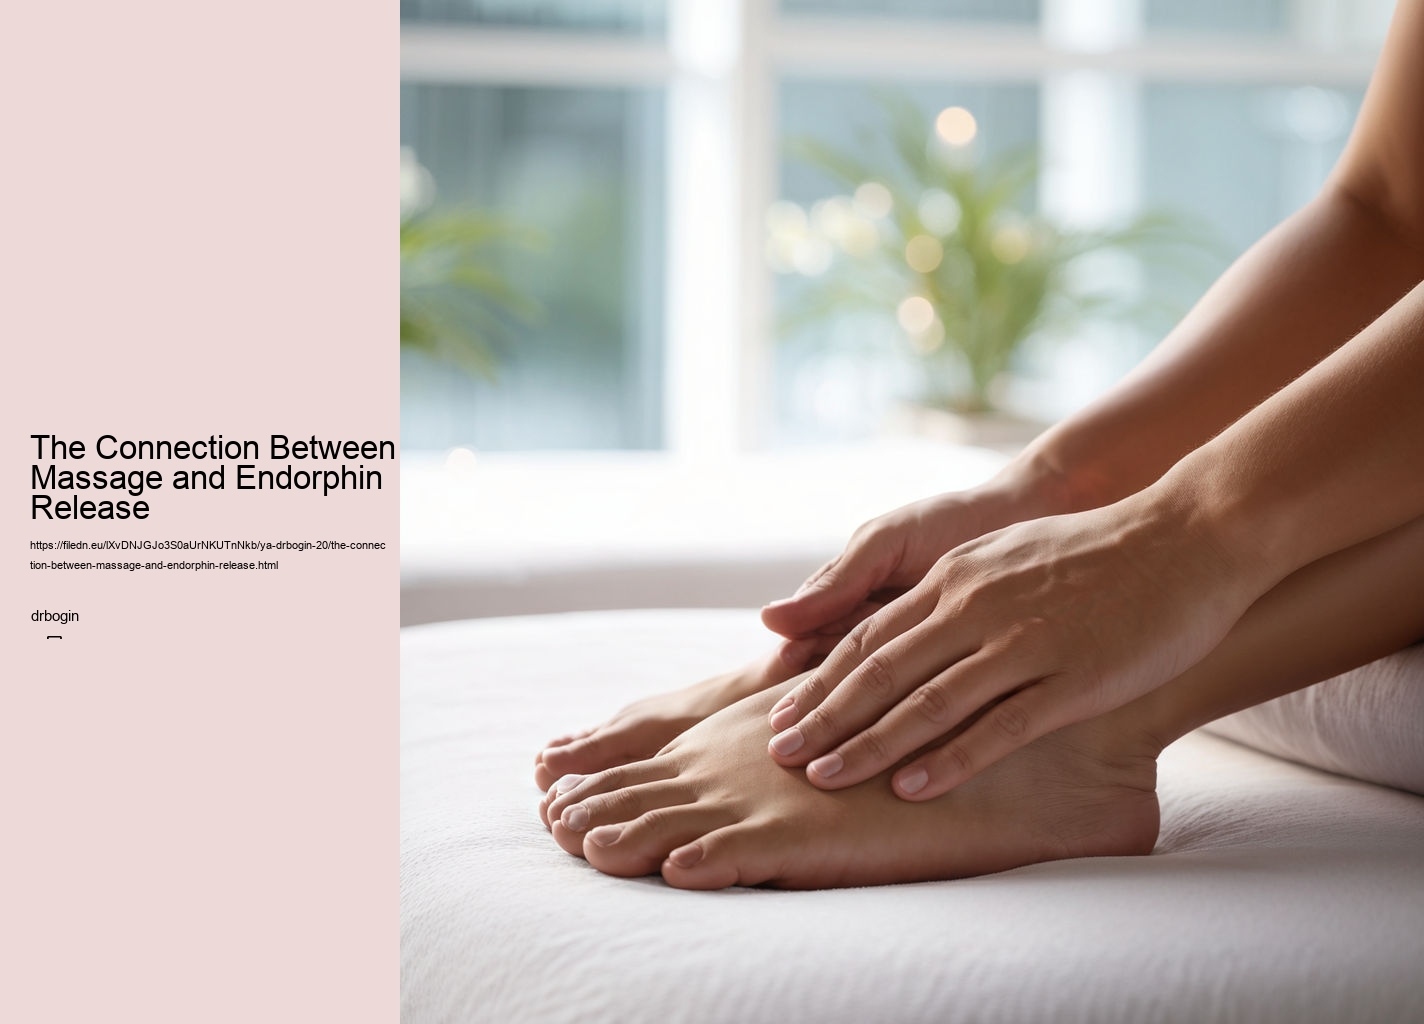 The Connection Between Massage and Endorphin Release